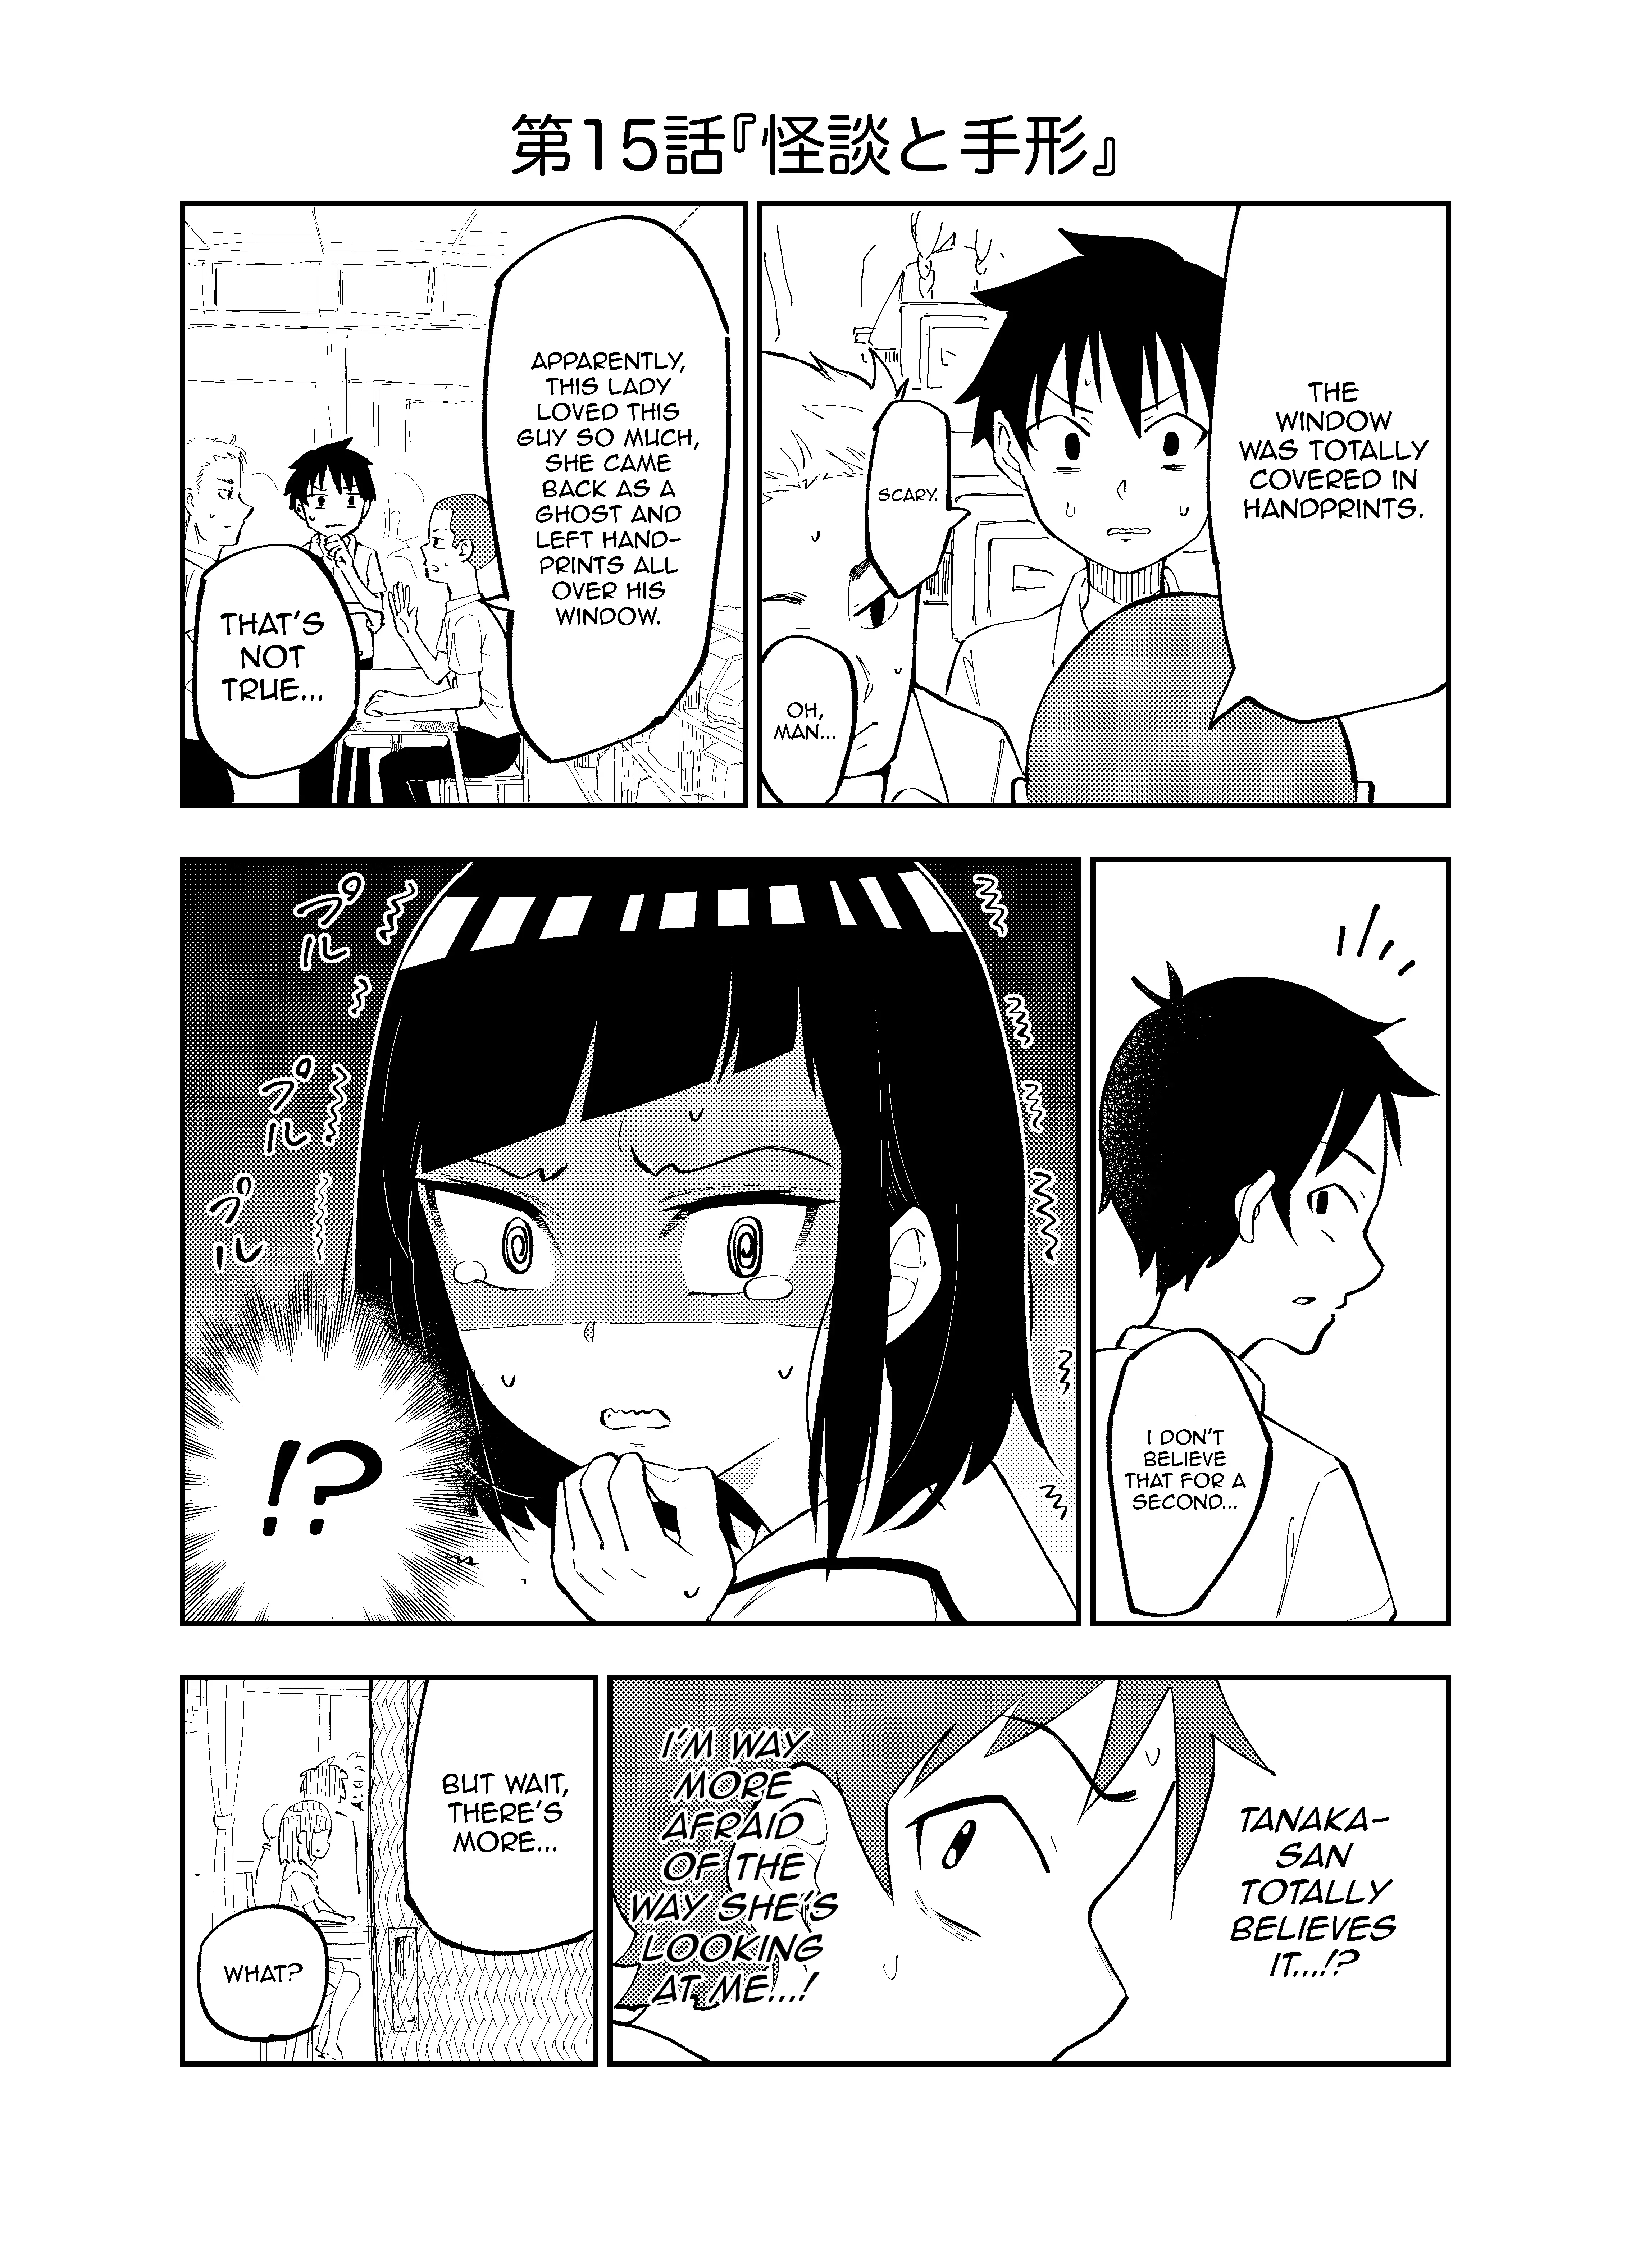 My Classmate Tanaka-San Is Super Scary - 15 page 1